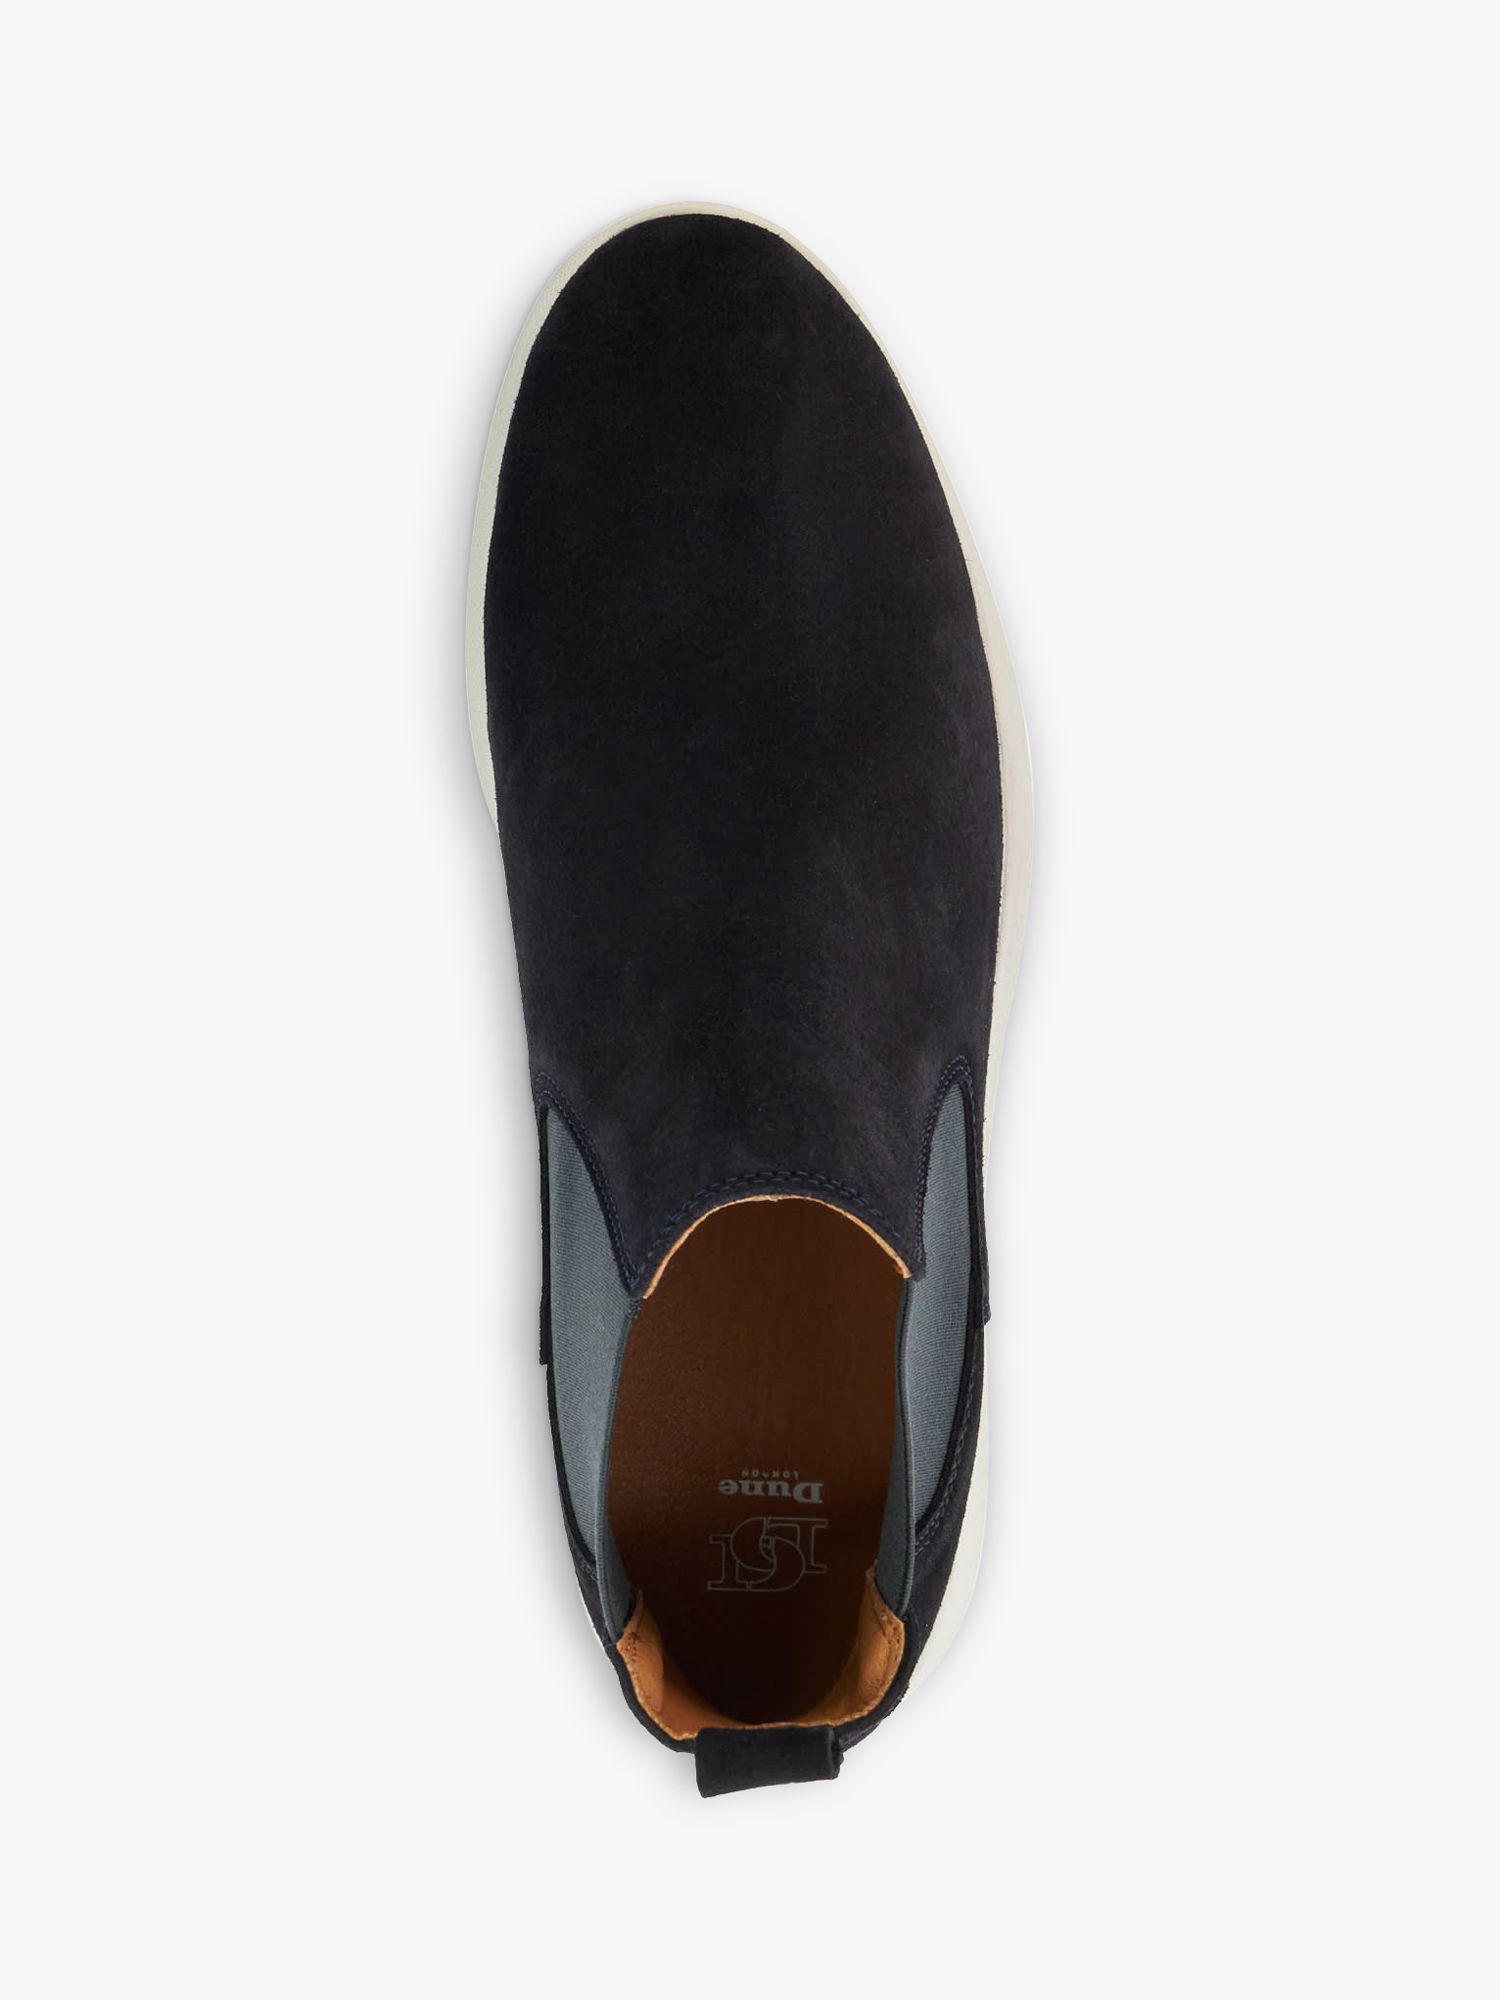 Buy Dune Creatives Suede Chelsea Boots Online at johnlewis.com